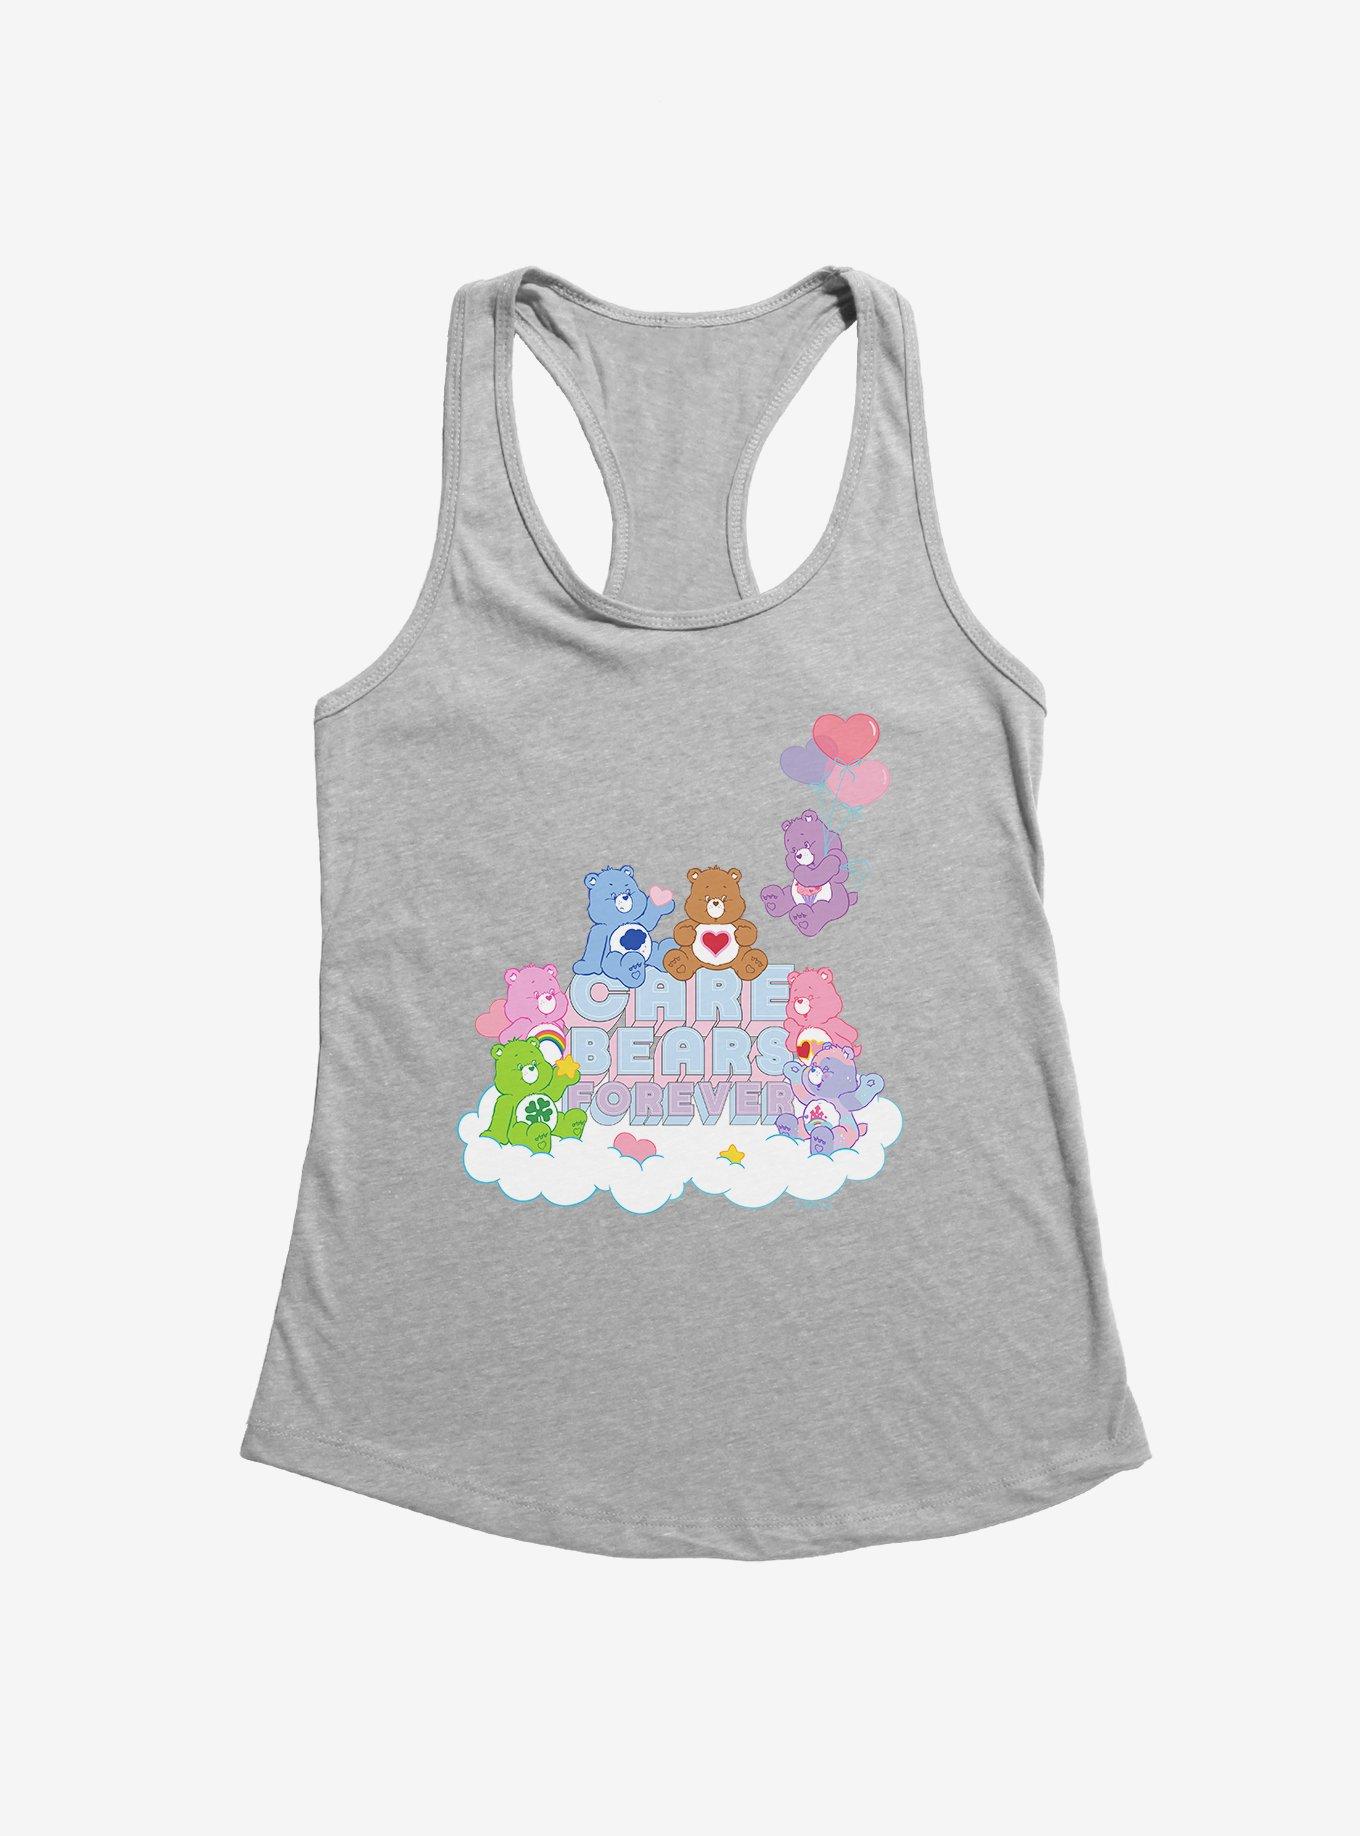 Care Bears Forever Girls Tank, HEATHER, hi-res